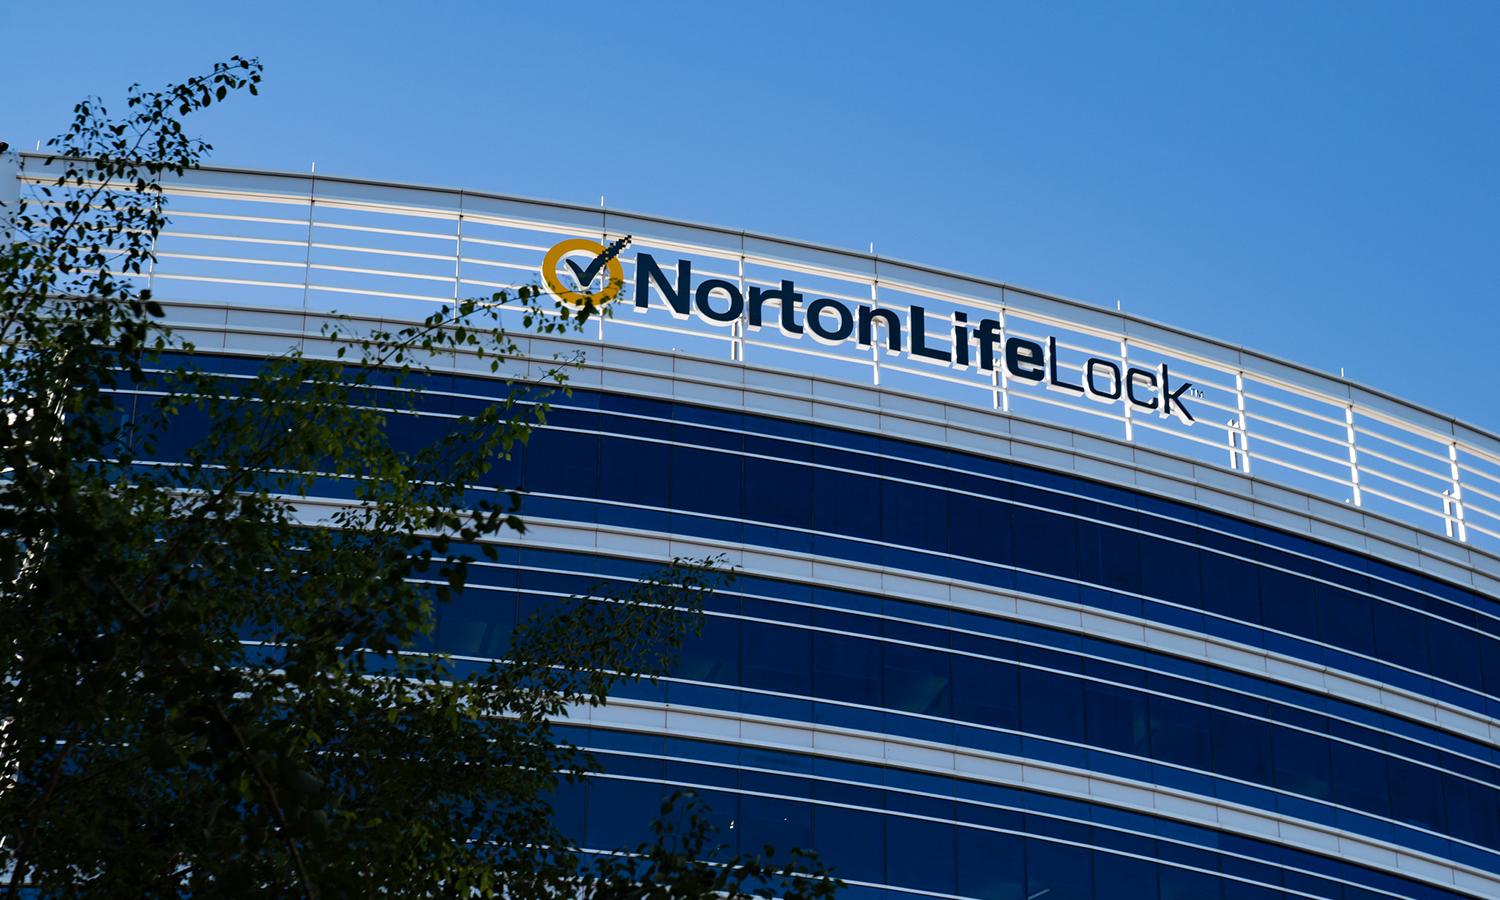 (&#8220;NortonLifeLock Office Headquarters &#8211; Tempe, Arizona&#8221; by Tony Webster is marked with CC BY 2.0.)